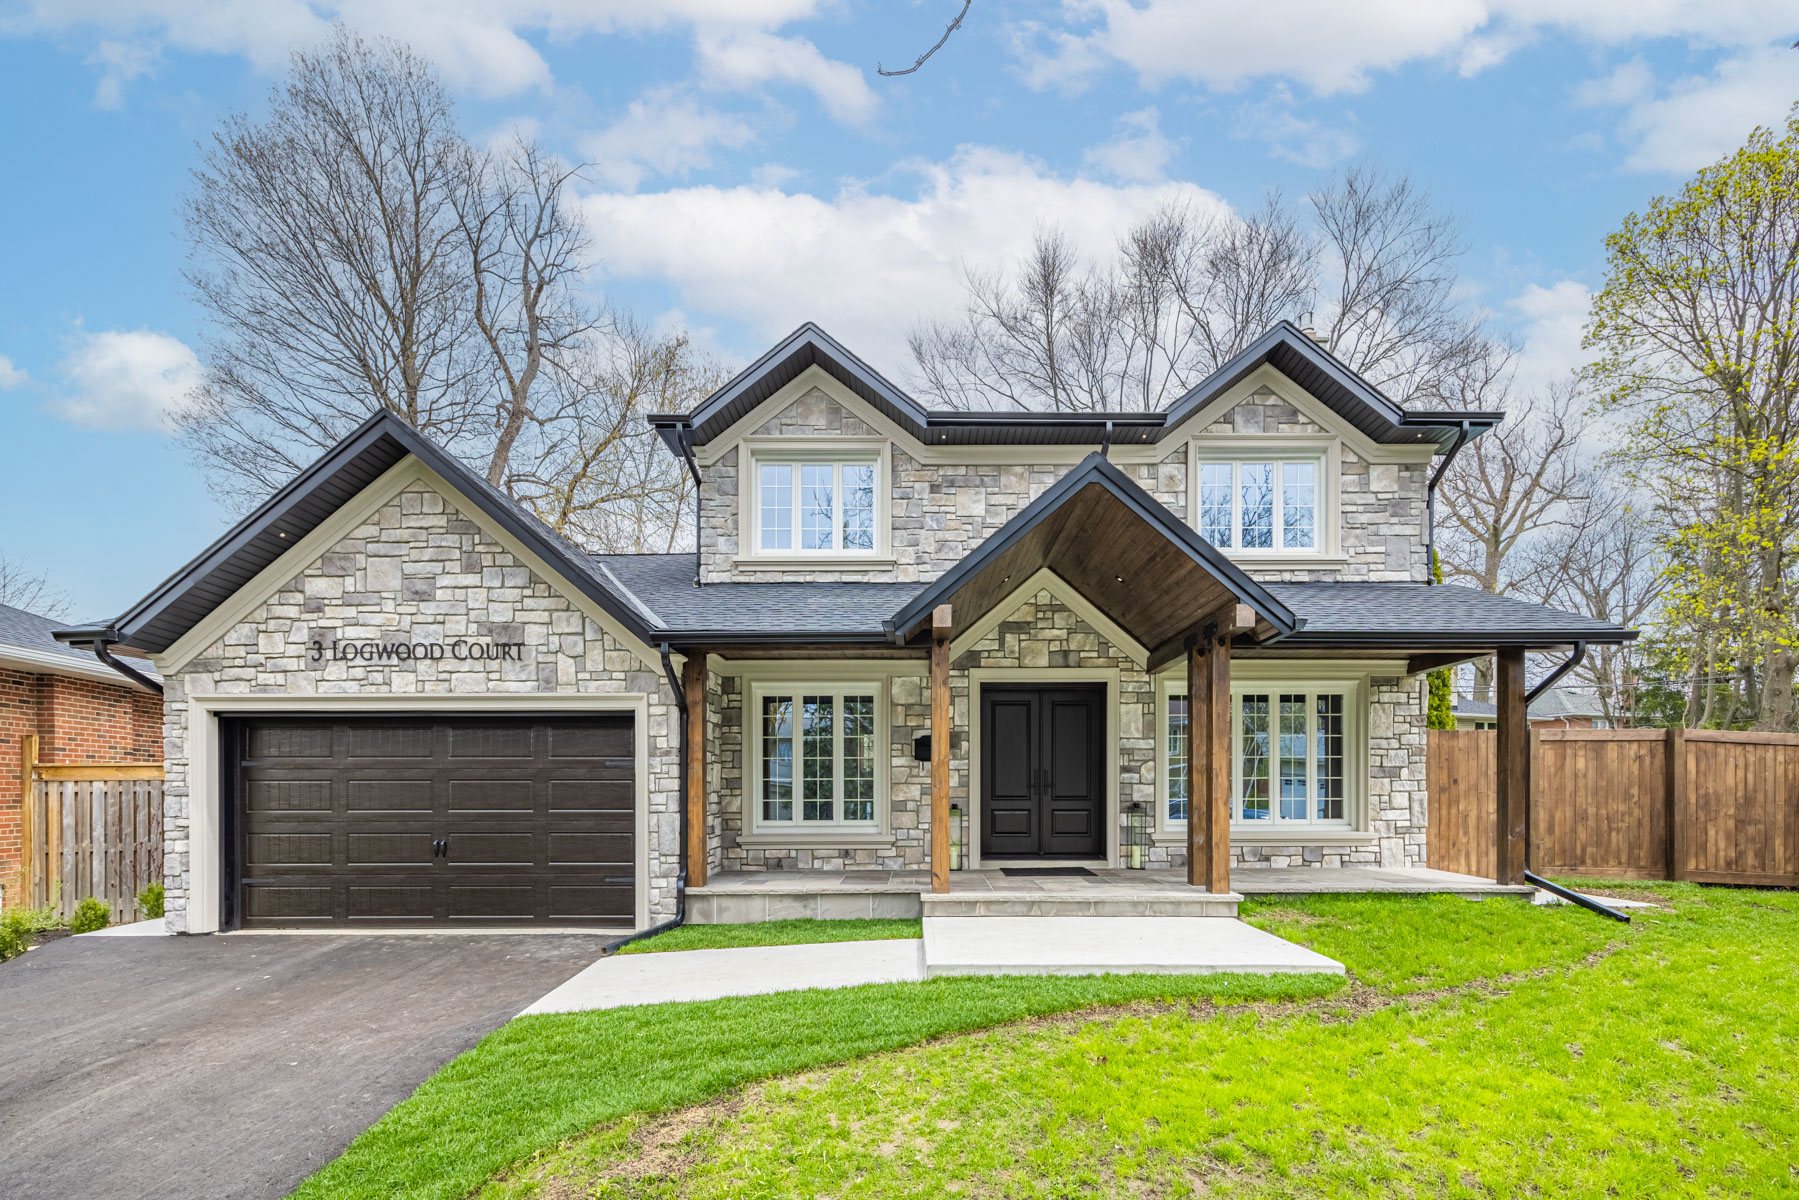 3 Logwood Court gray stone exterior with green lawn, large driveway and 2 car garage.